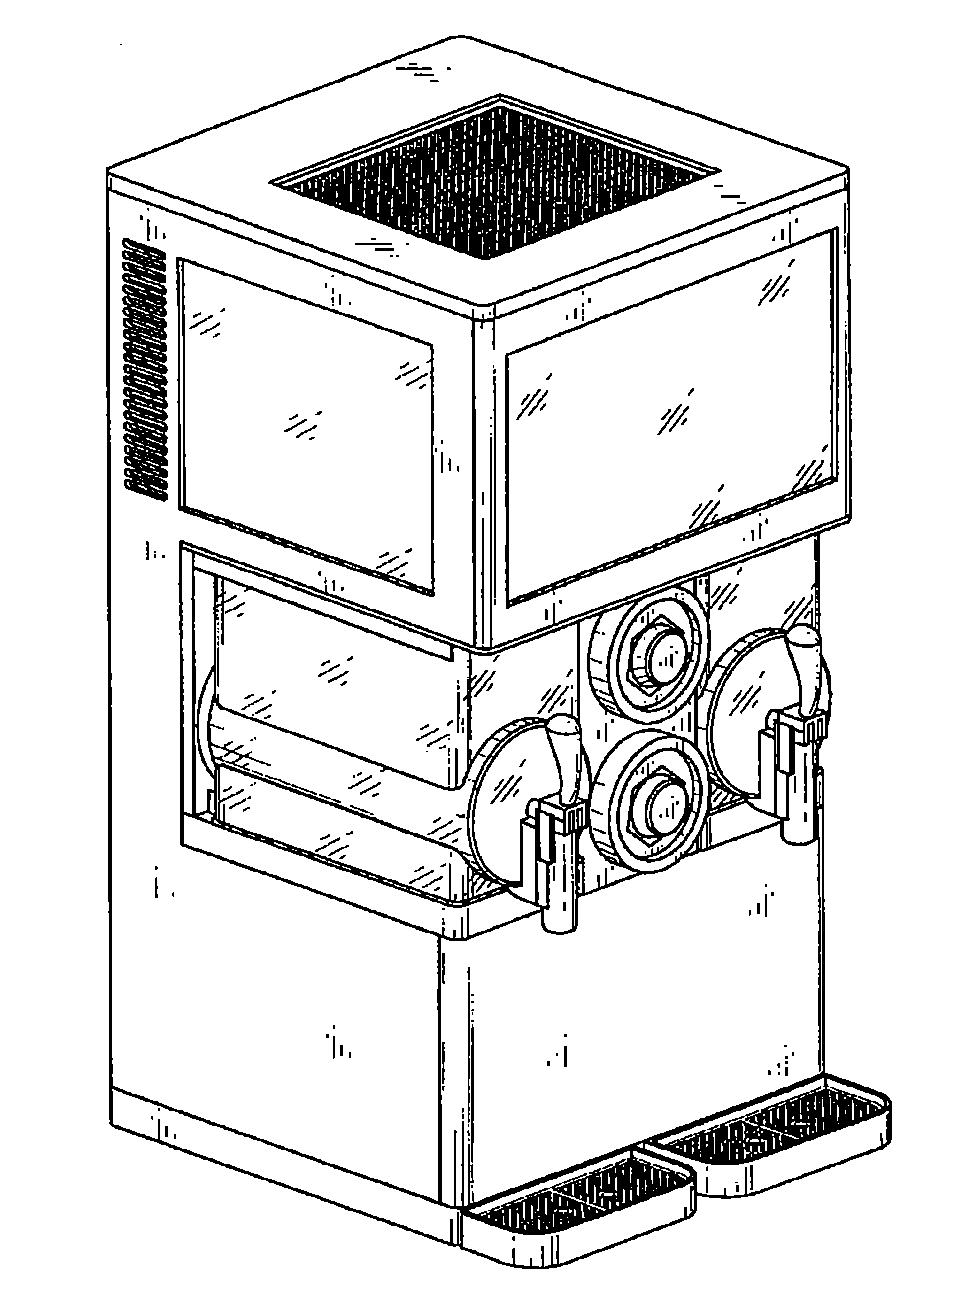 Example of a console type beverage dispenser with pluralvalve.
